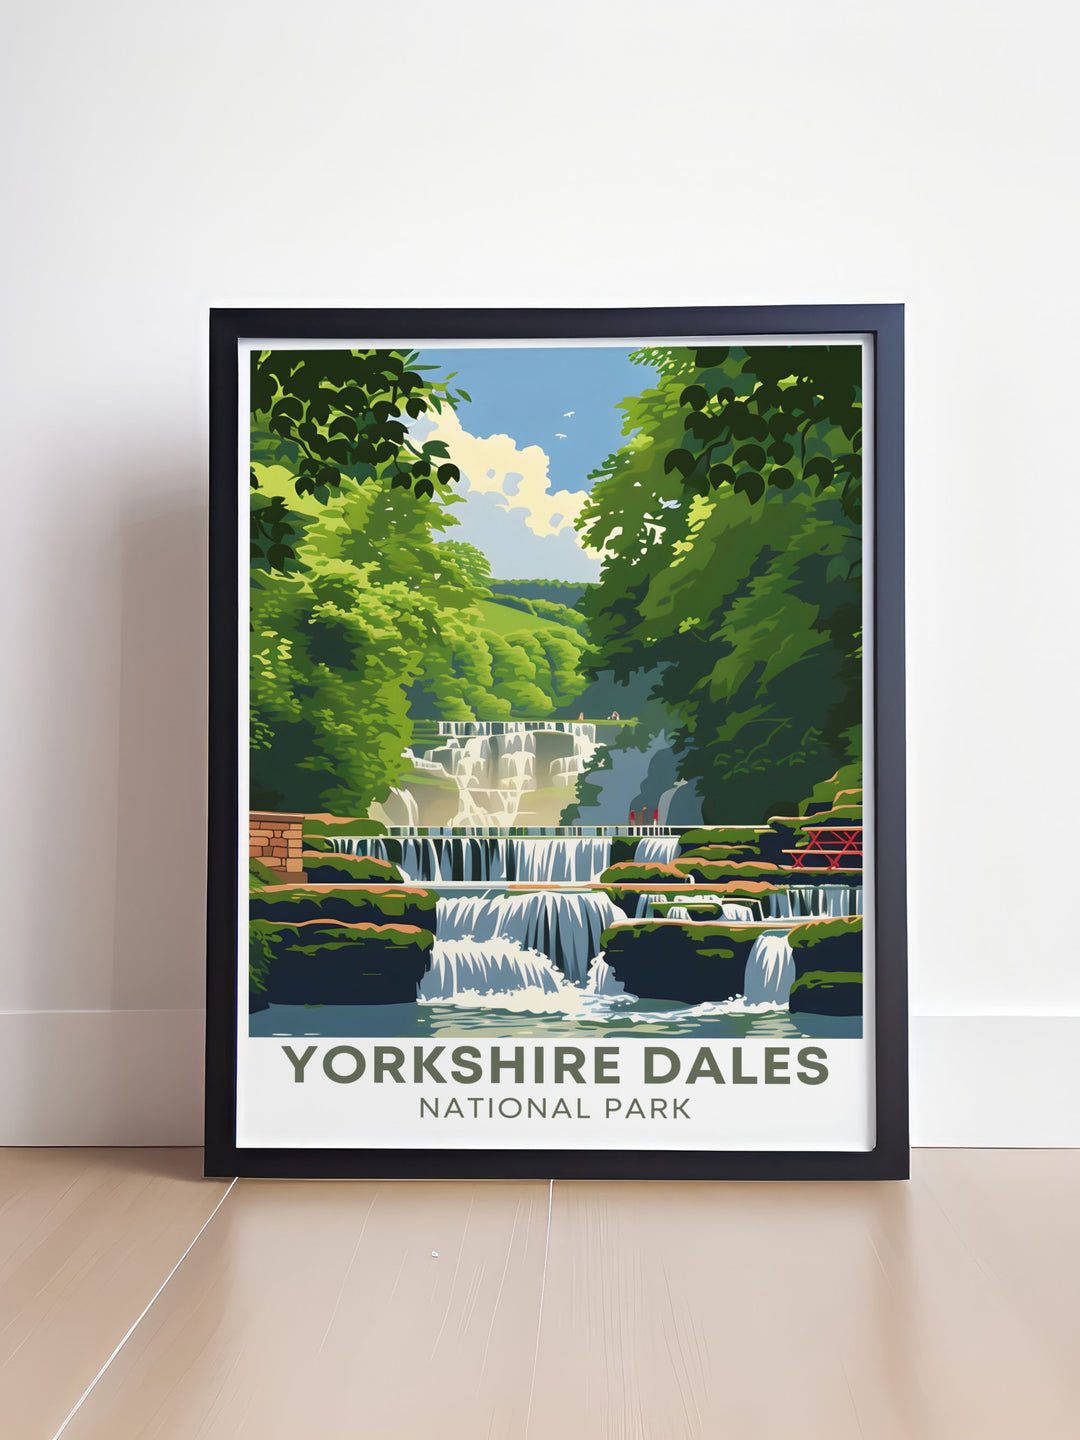 Enhance your living space with Aysgarth Falls artwork. This print showcases the beauty of the Yorkshire Dales and its iconic waterfalls making it a great addition to any room and a wonderful gift for those who love the tranquility and beauty of nature.